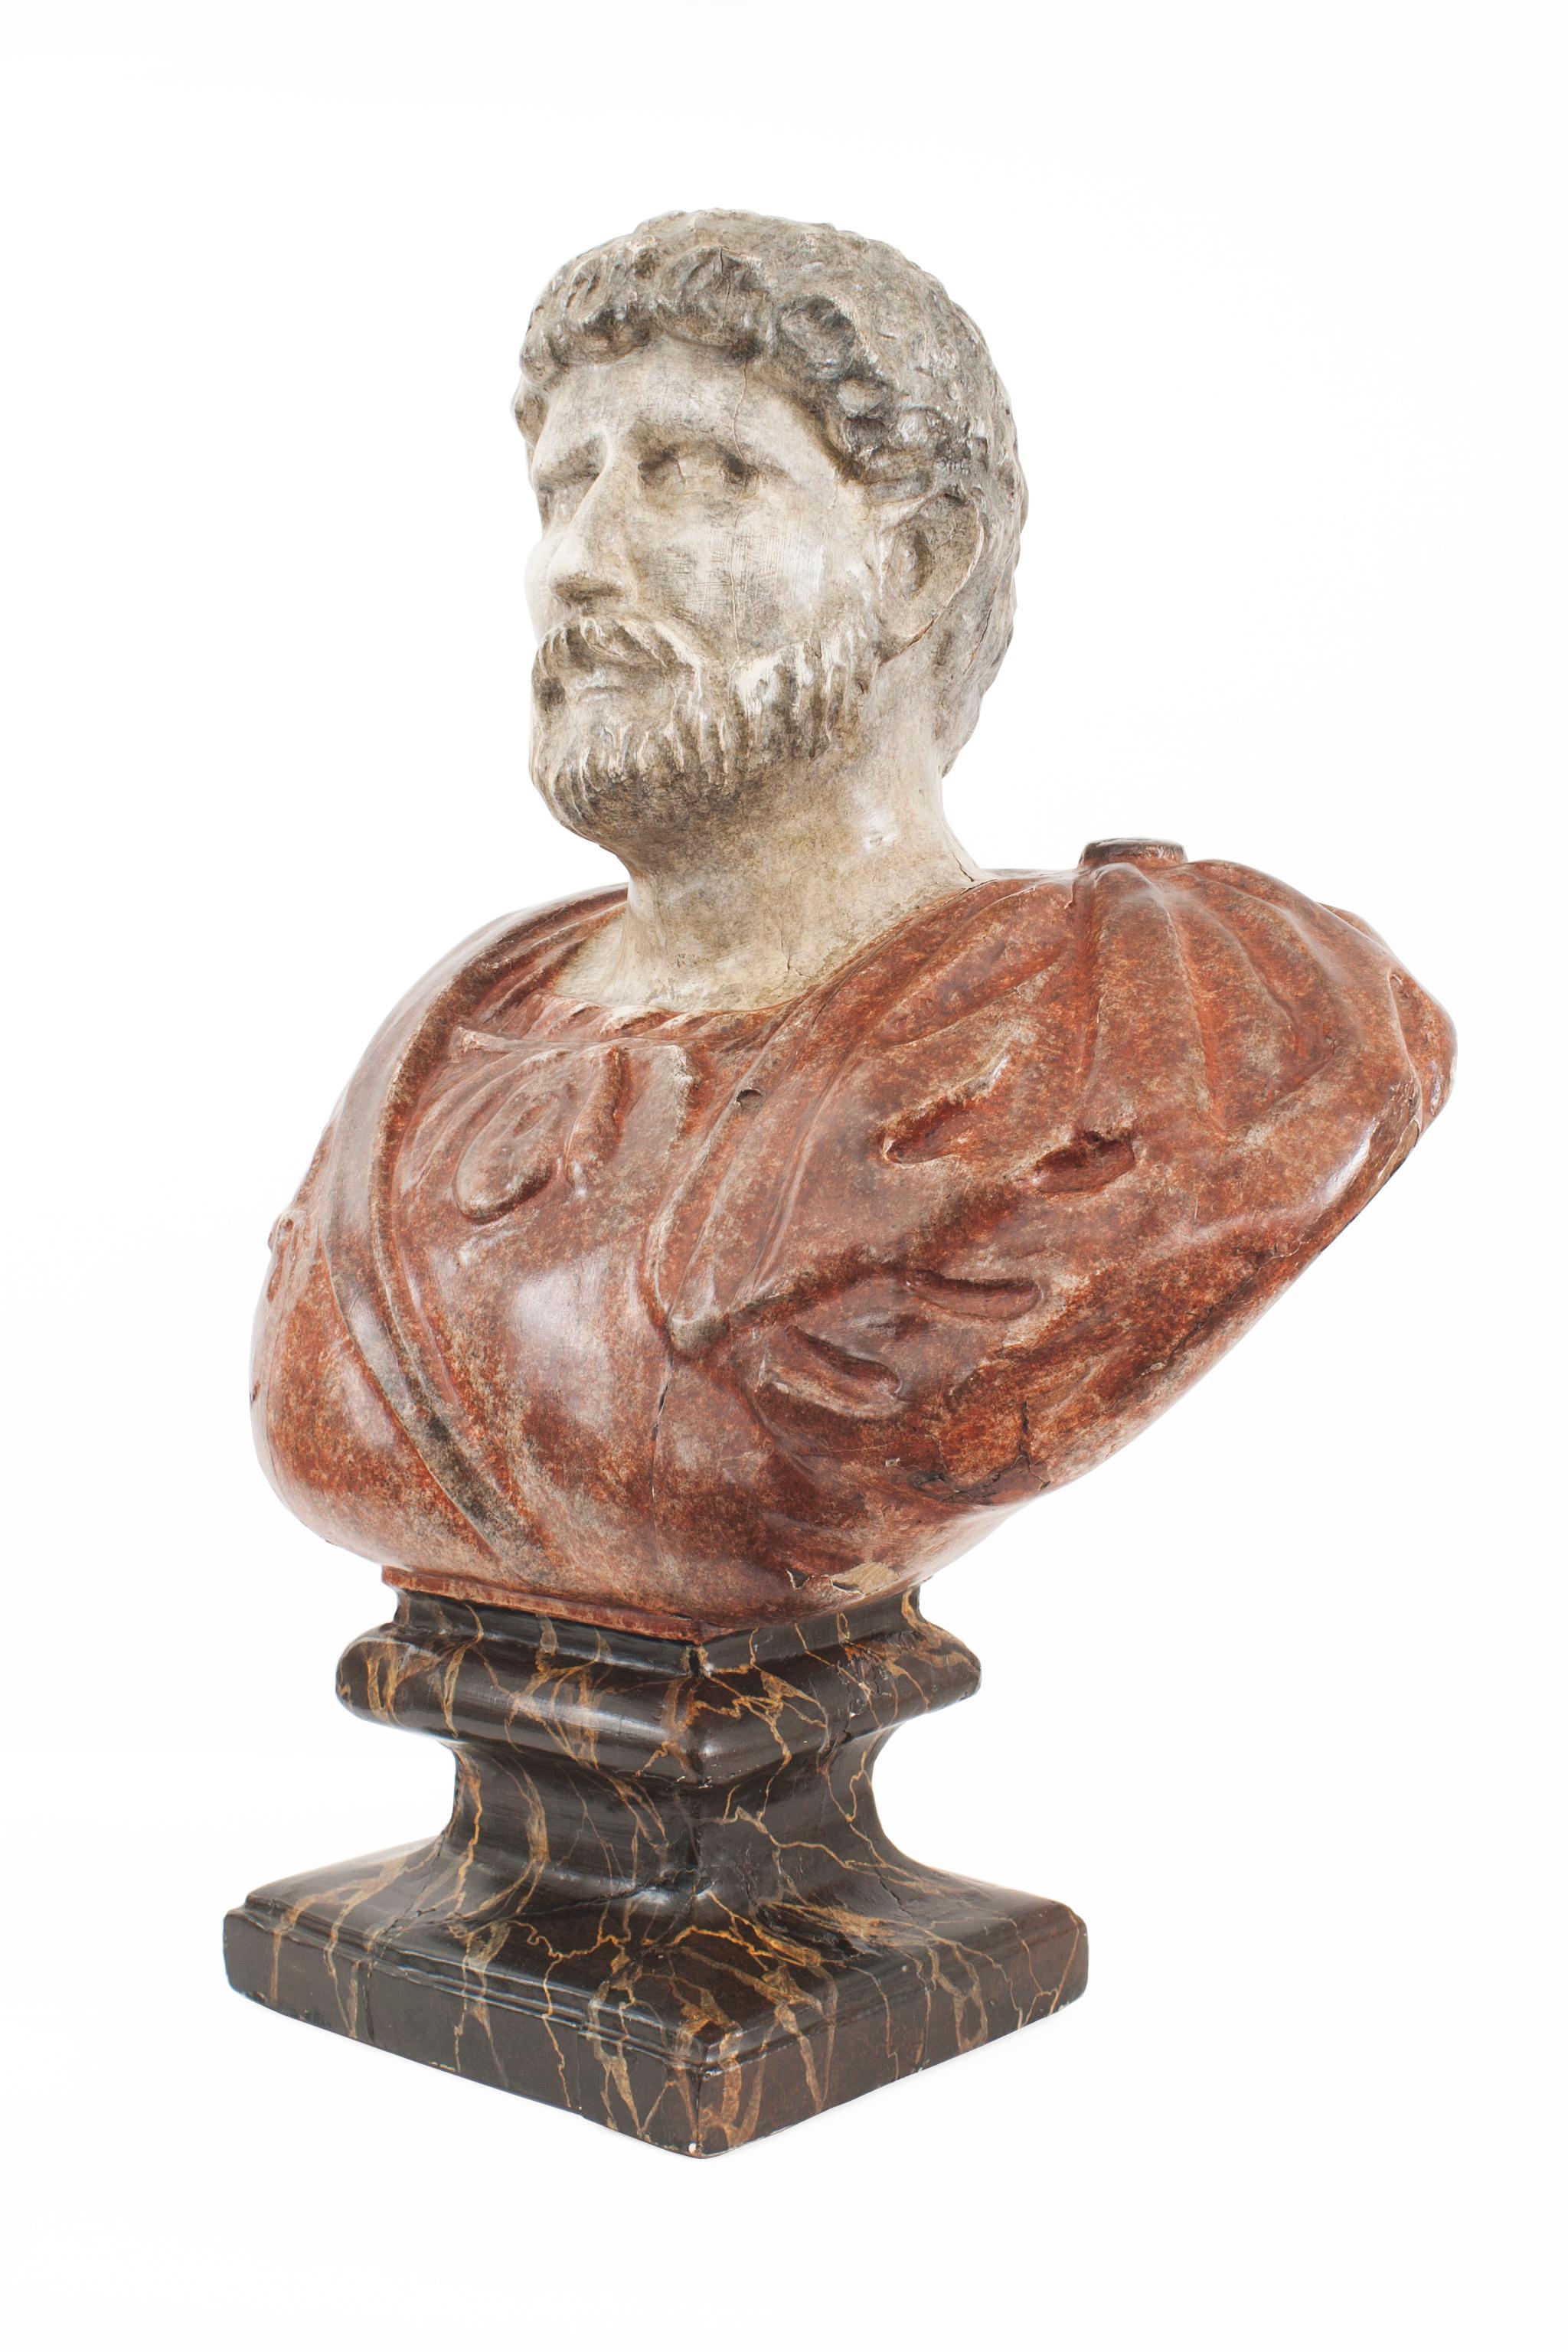 Italian Neo-Classic style (19/20th Cent) faux painted composition bust of a Roman Emperor wearing a red toga and mounted on a black square base.
